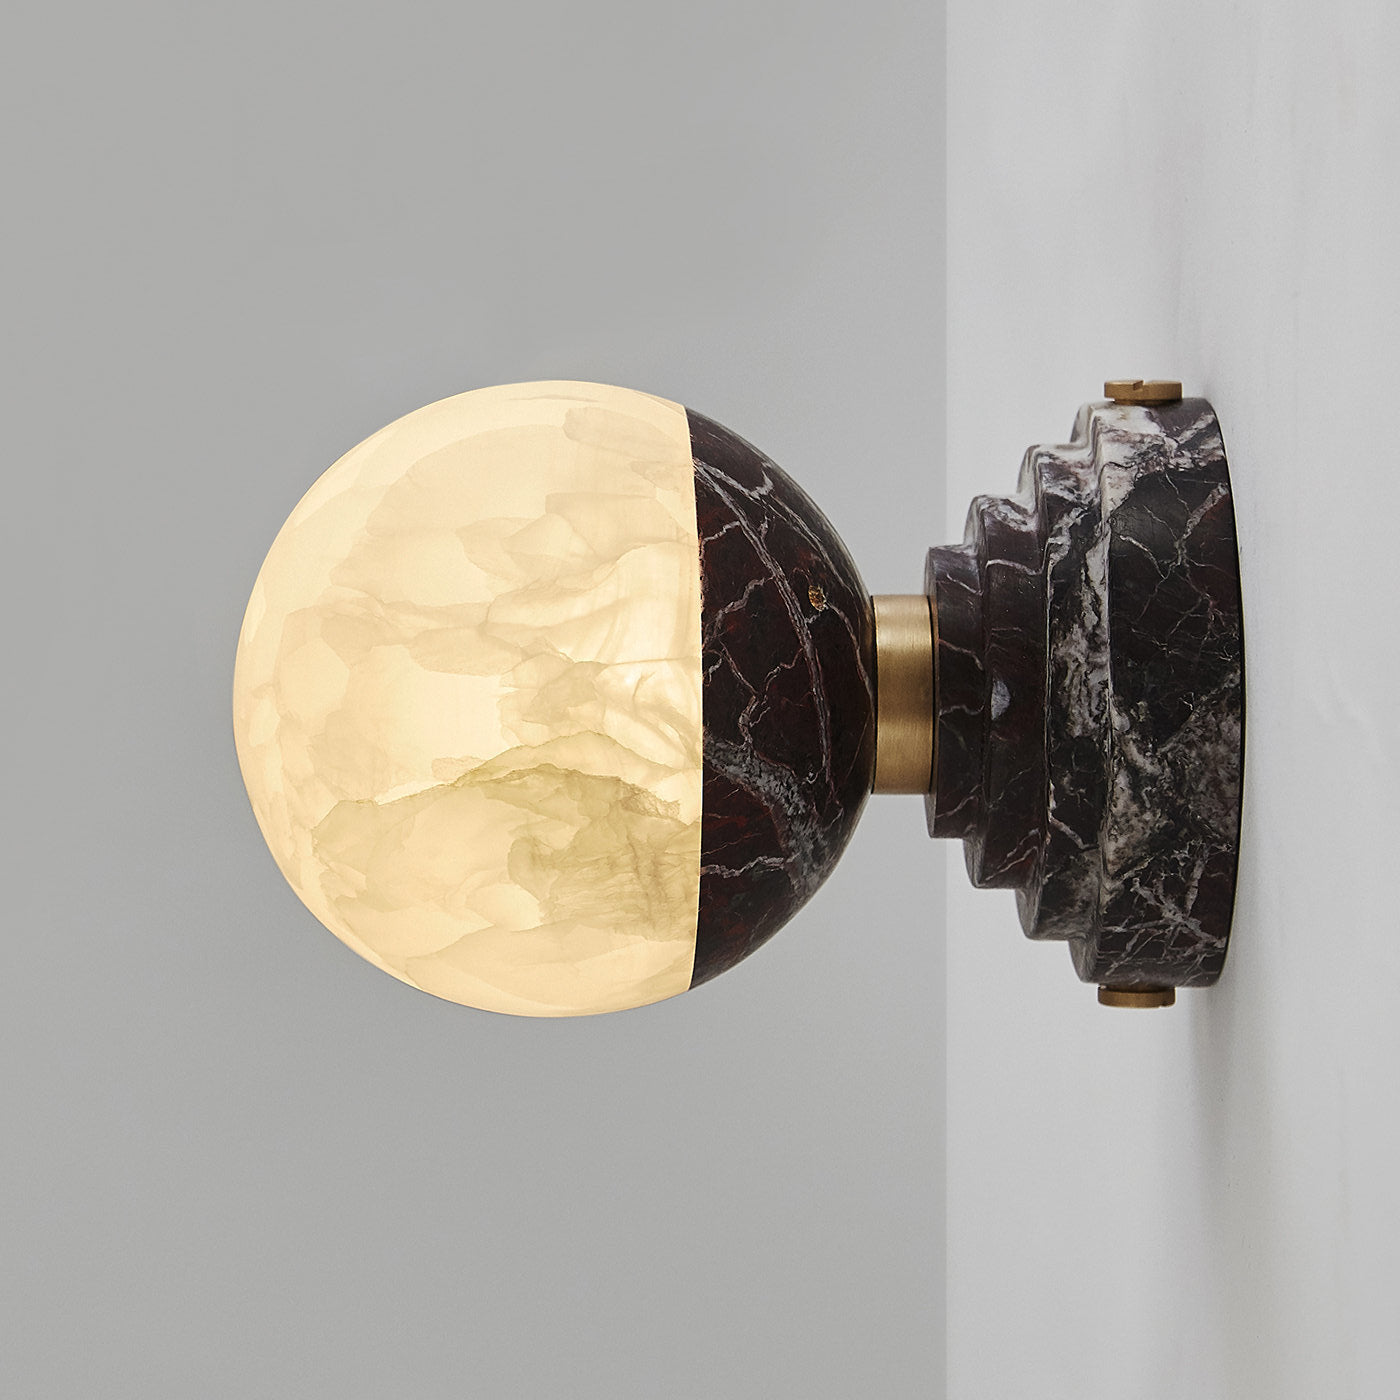 Lunar Sconce in Rosso Levanto Marble and Onyx  - Alternative view 1